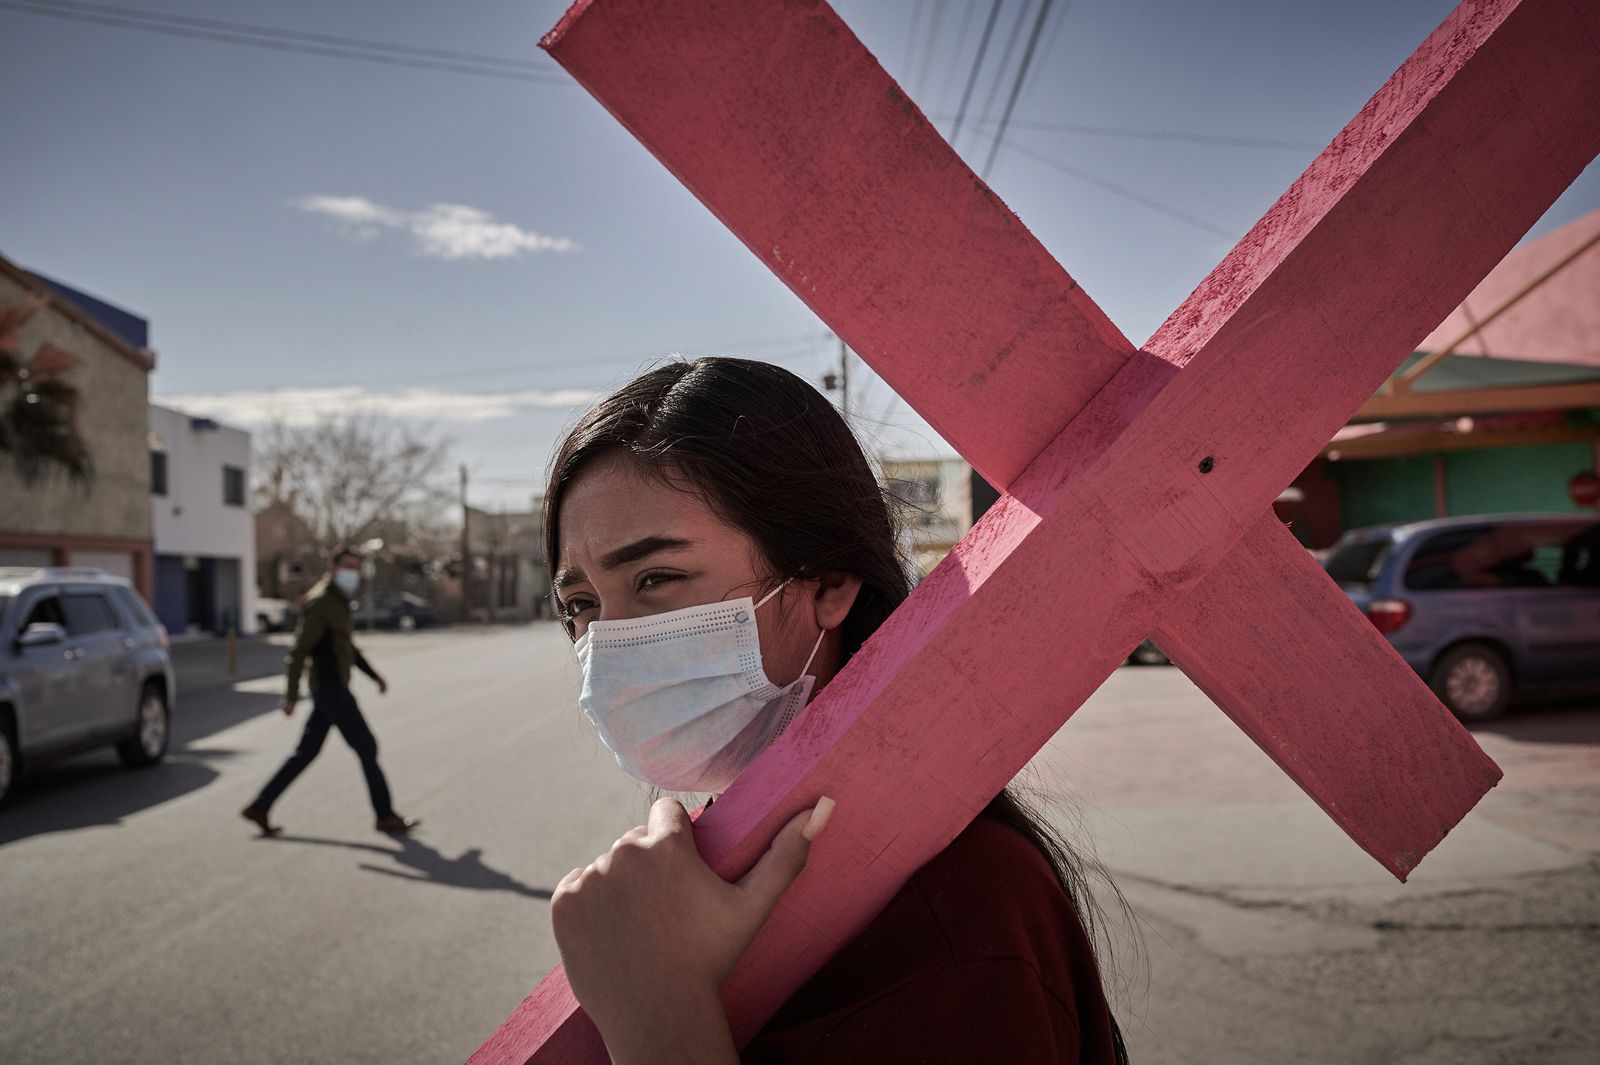 © Elipe mahé - Mariana, 13 years old, wears the pink cross symbolic of feminicides. Ciudad Juarez, Chihuahua , March 03, 2021